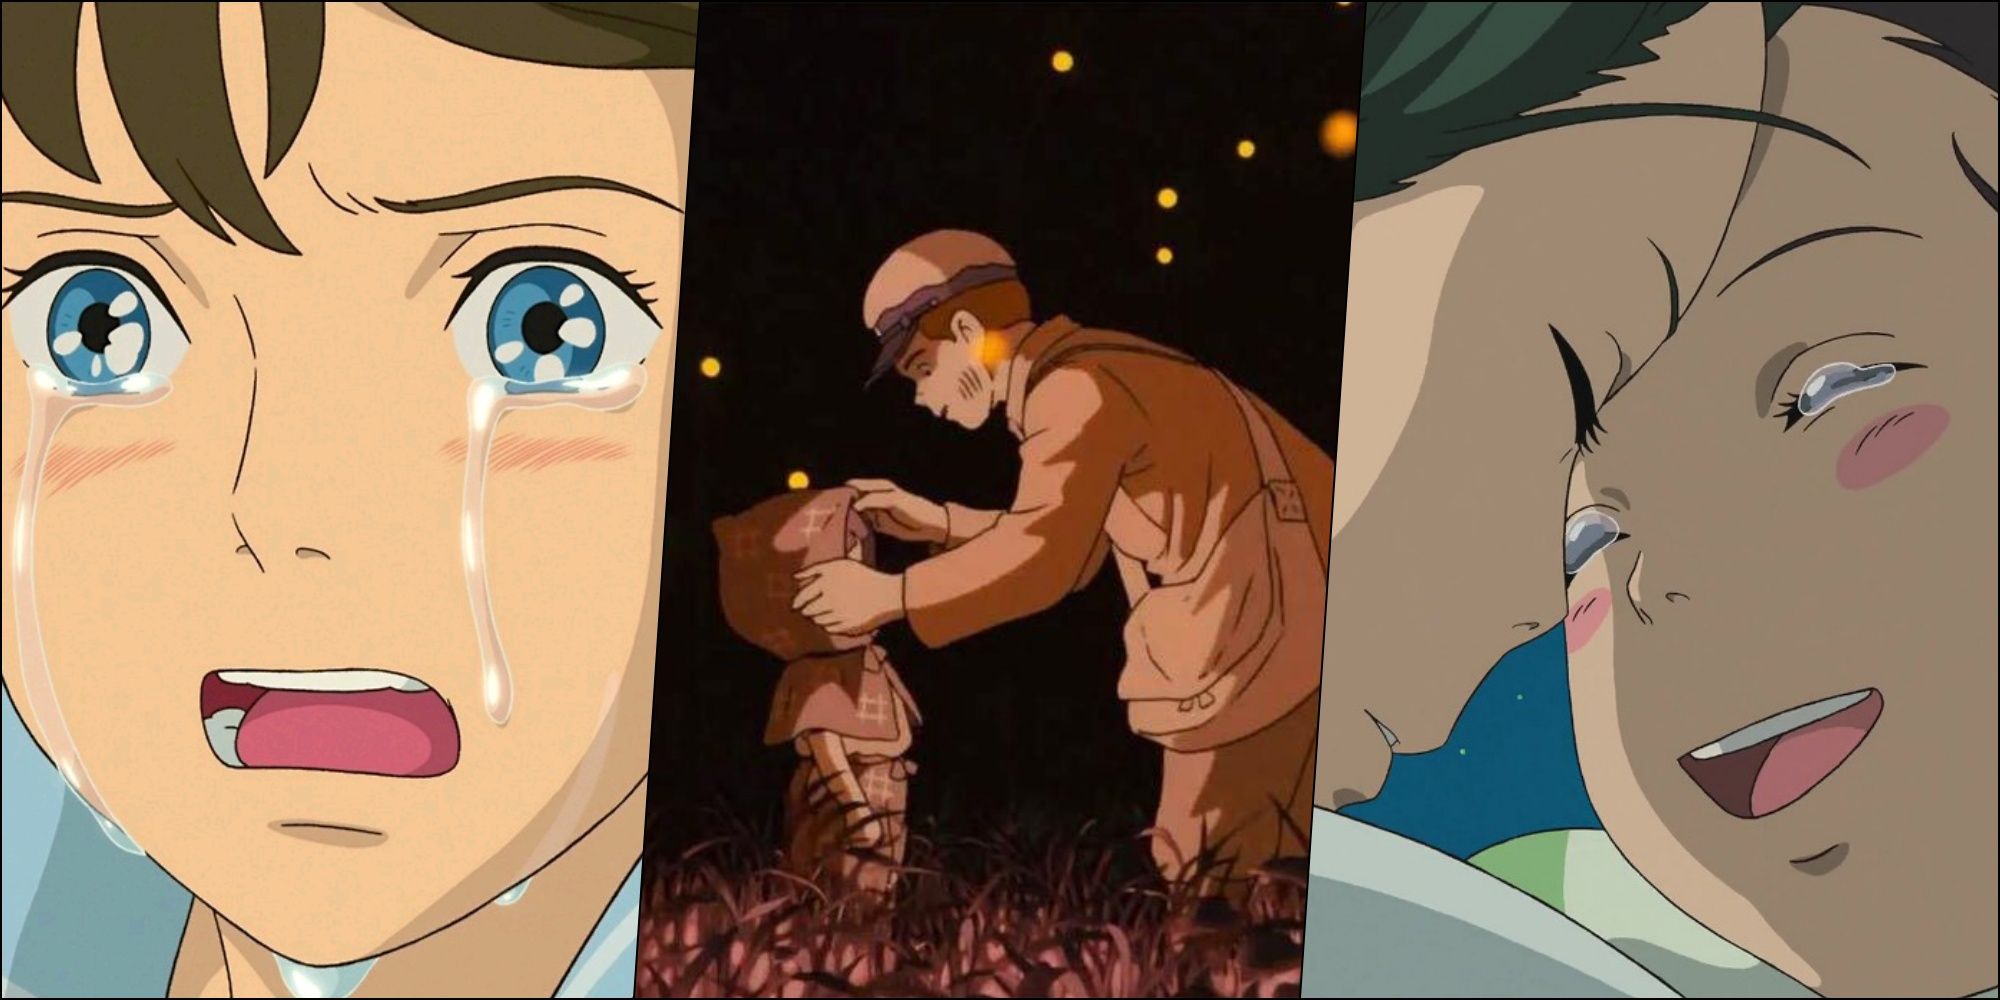 10 Brilliant Studio Ghibli Films to Watch with the Kids